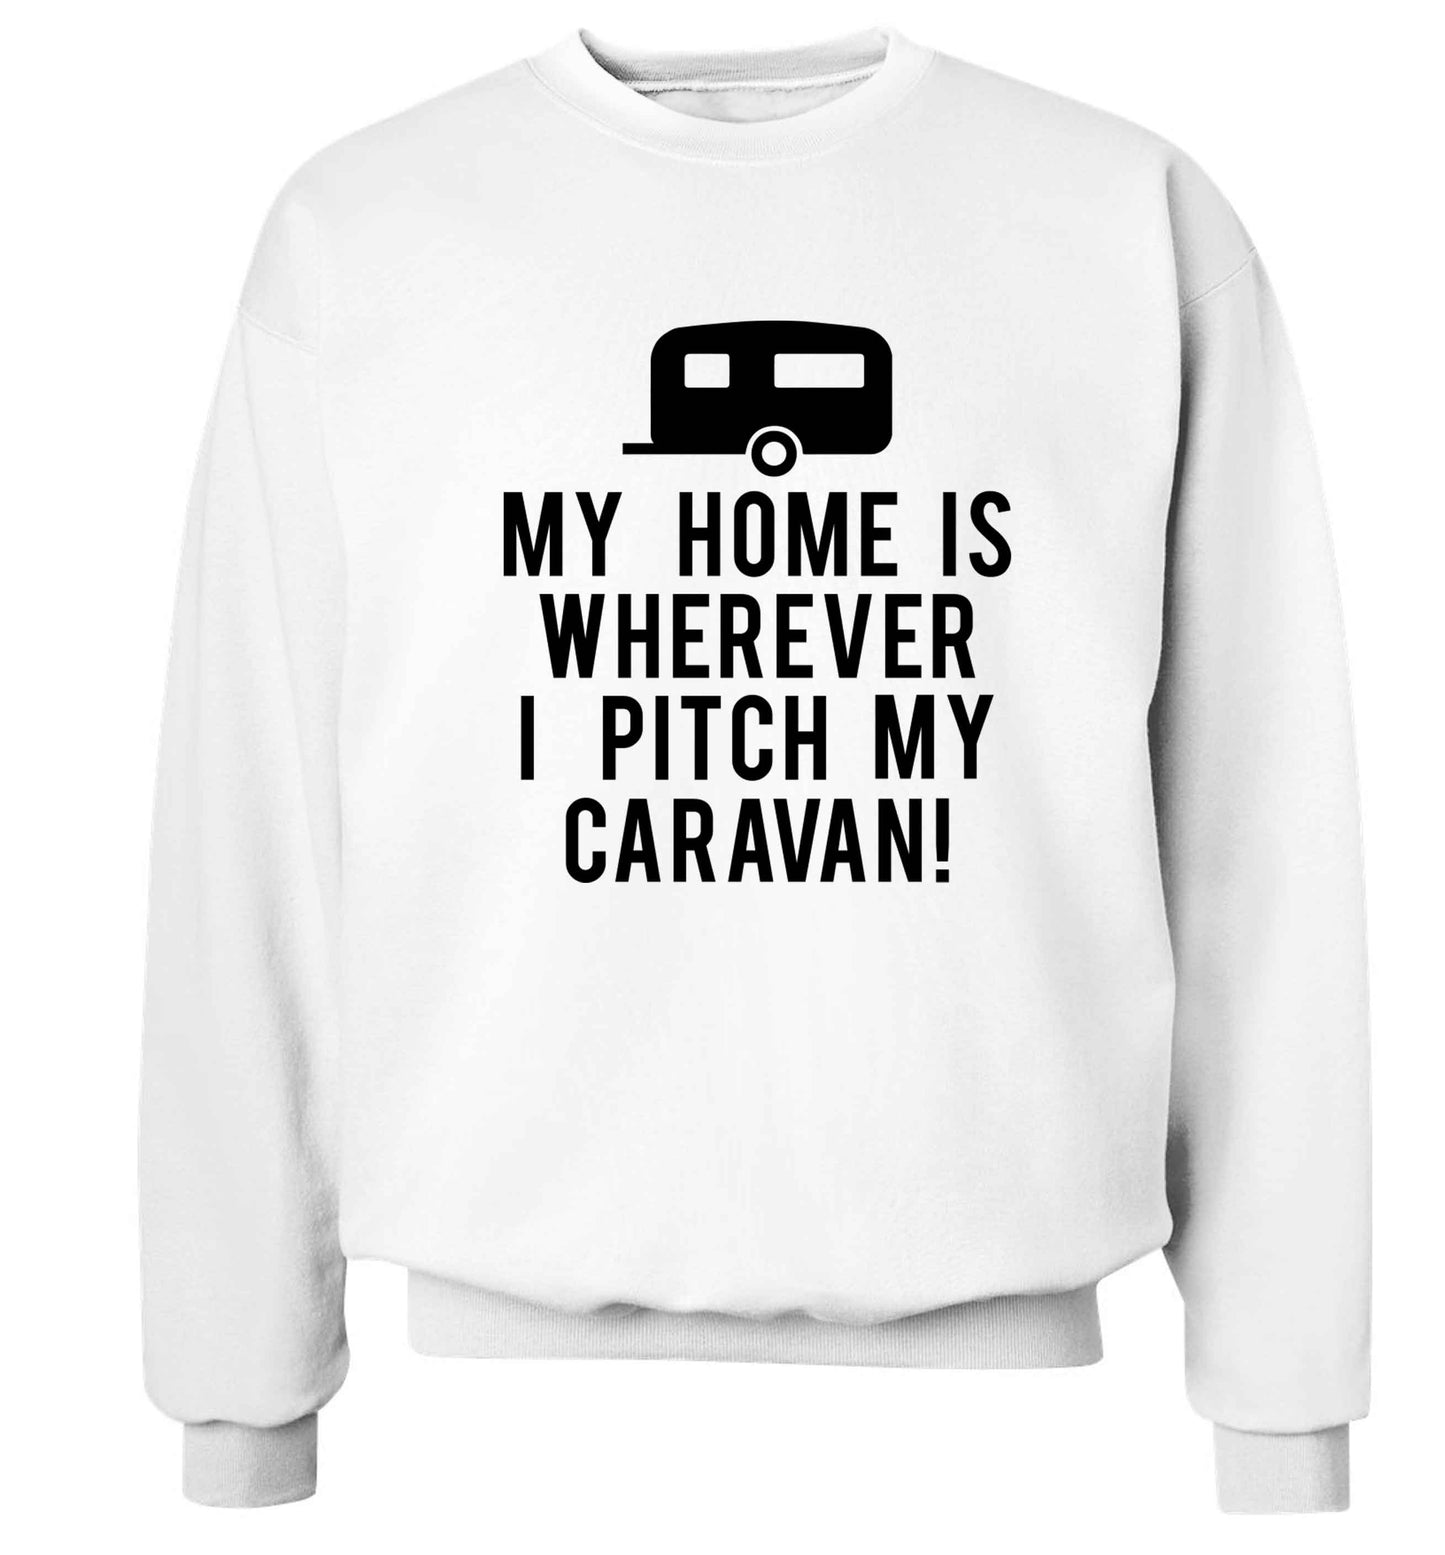 My home is wherever I pitch my caravan Adult's unisex white Sweater 2XL